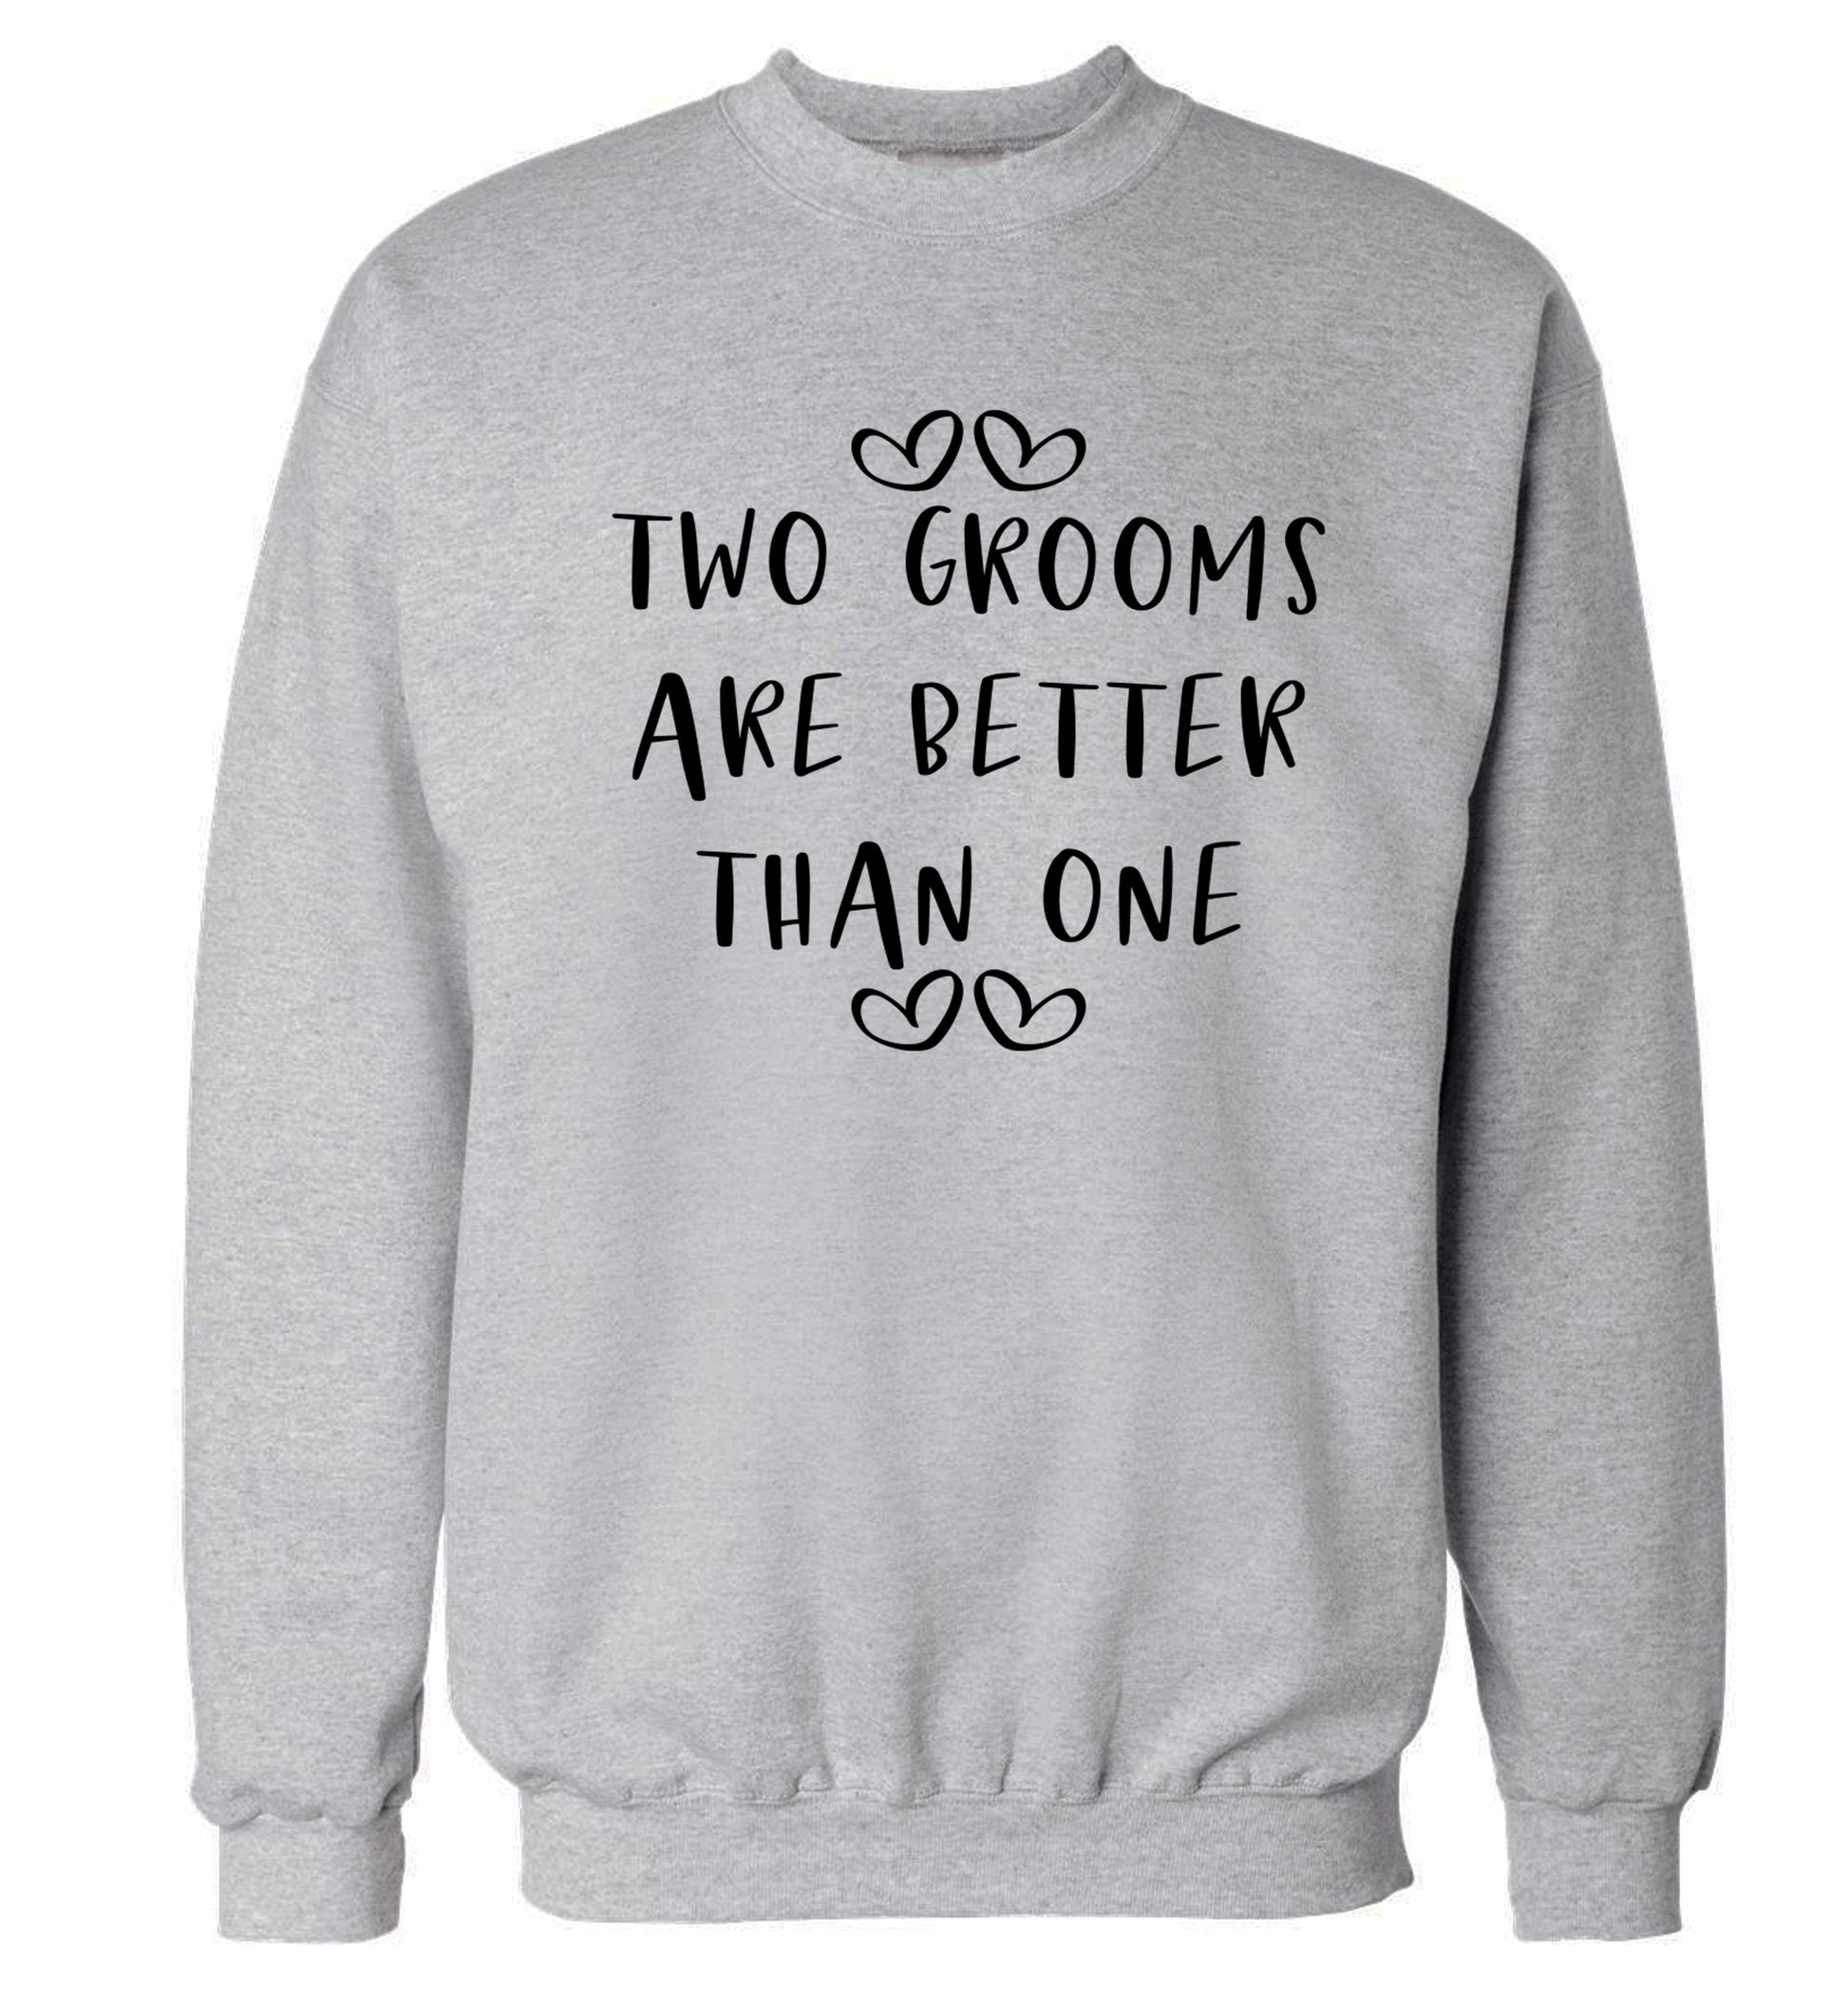 Two grooms are better than one adult's unisex grey sweater 2XL